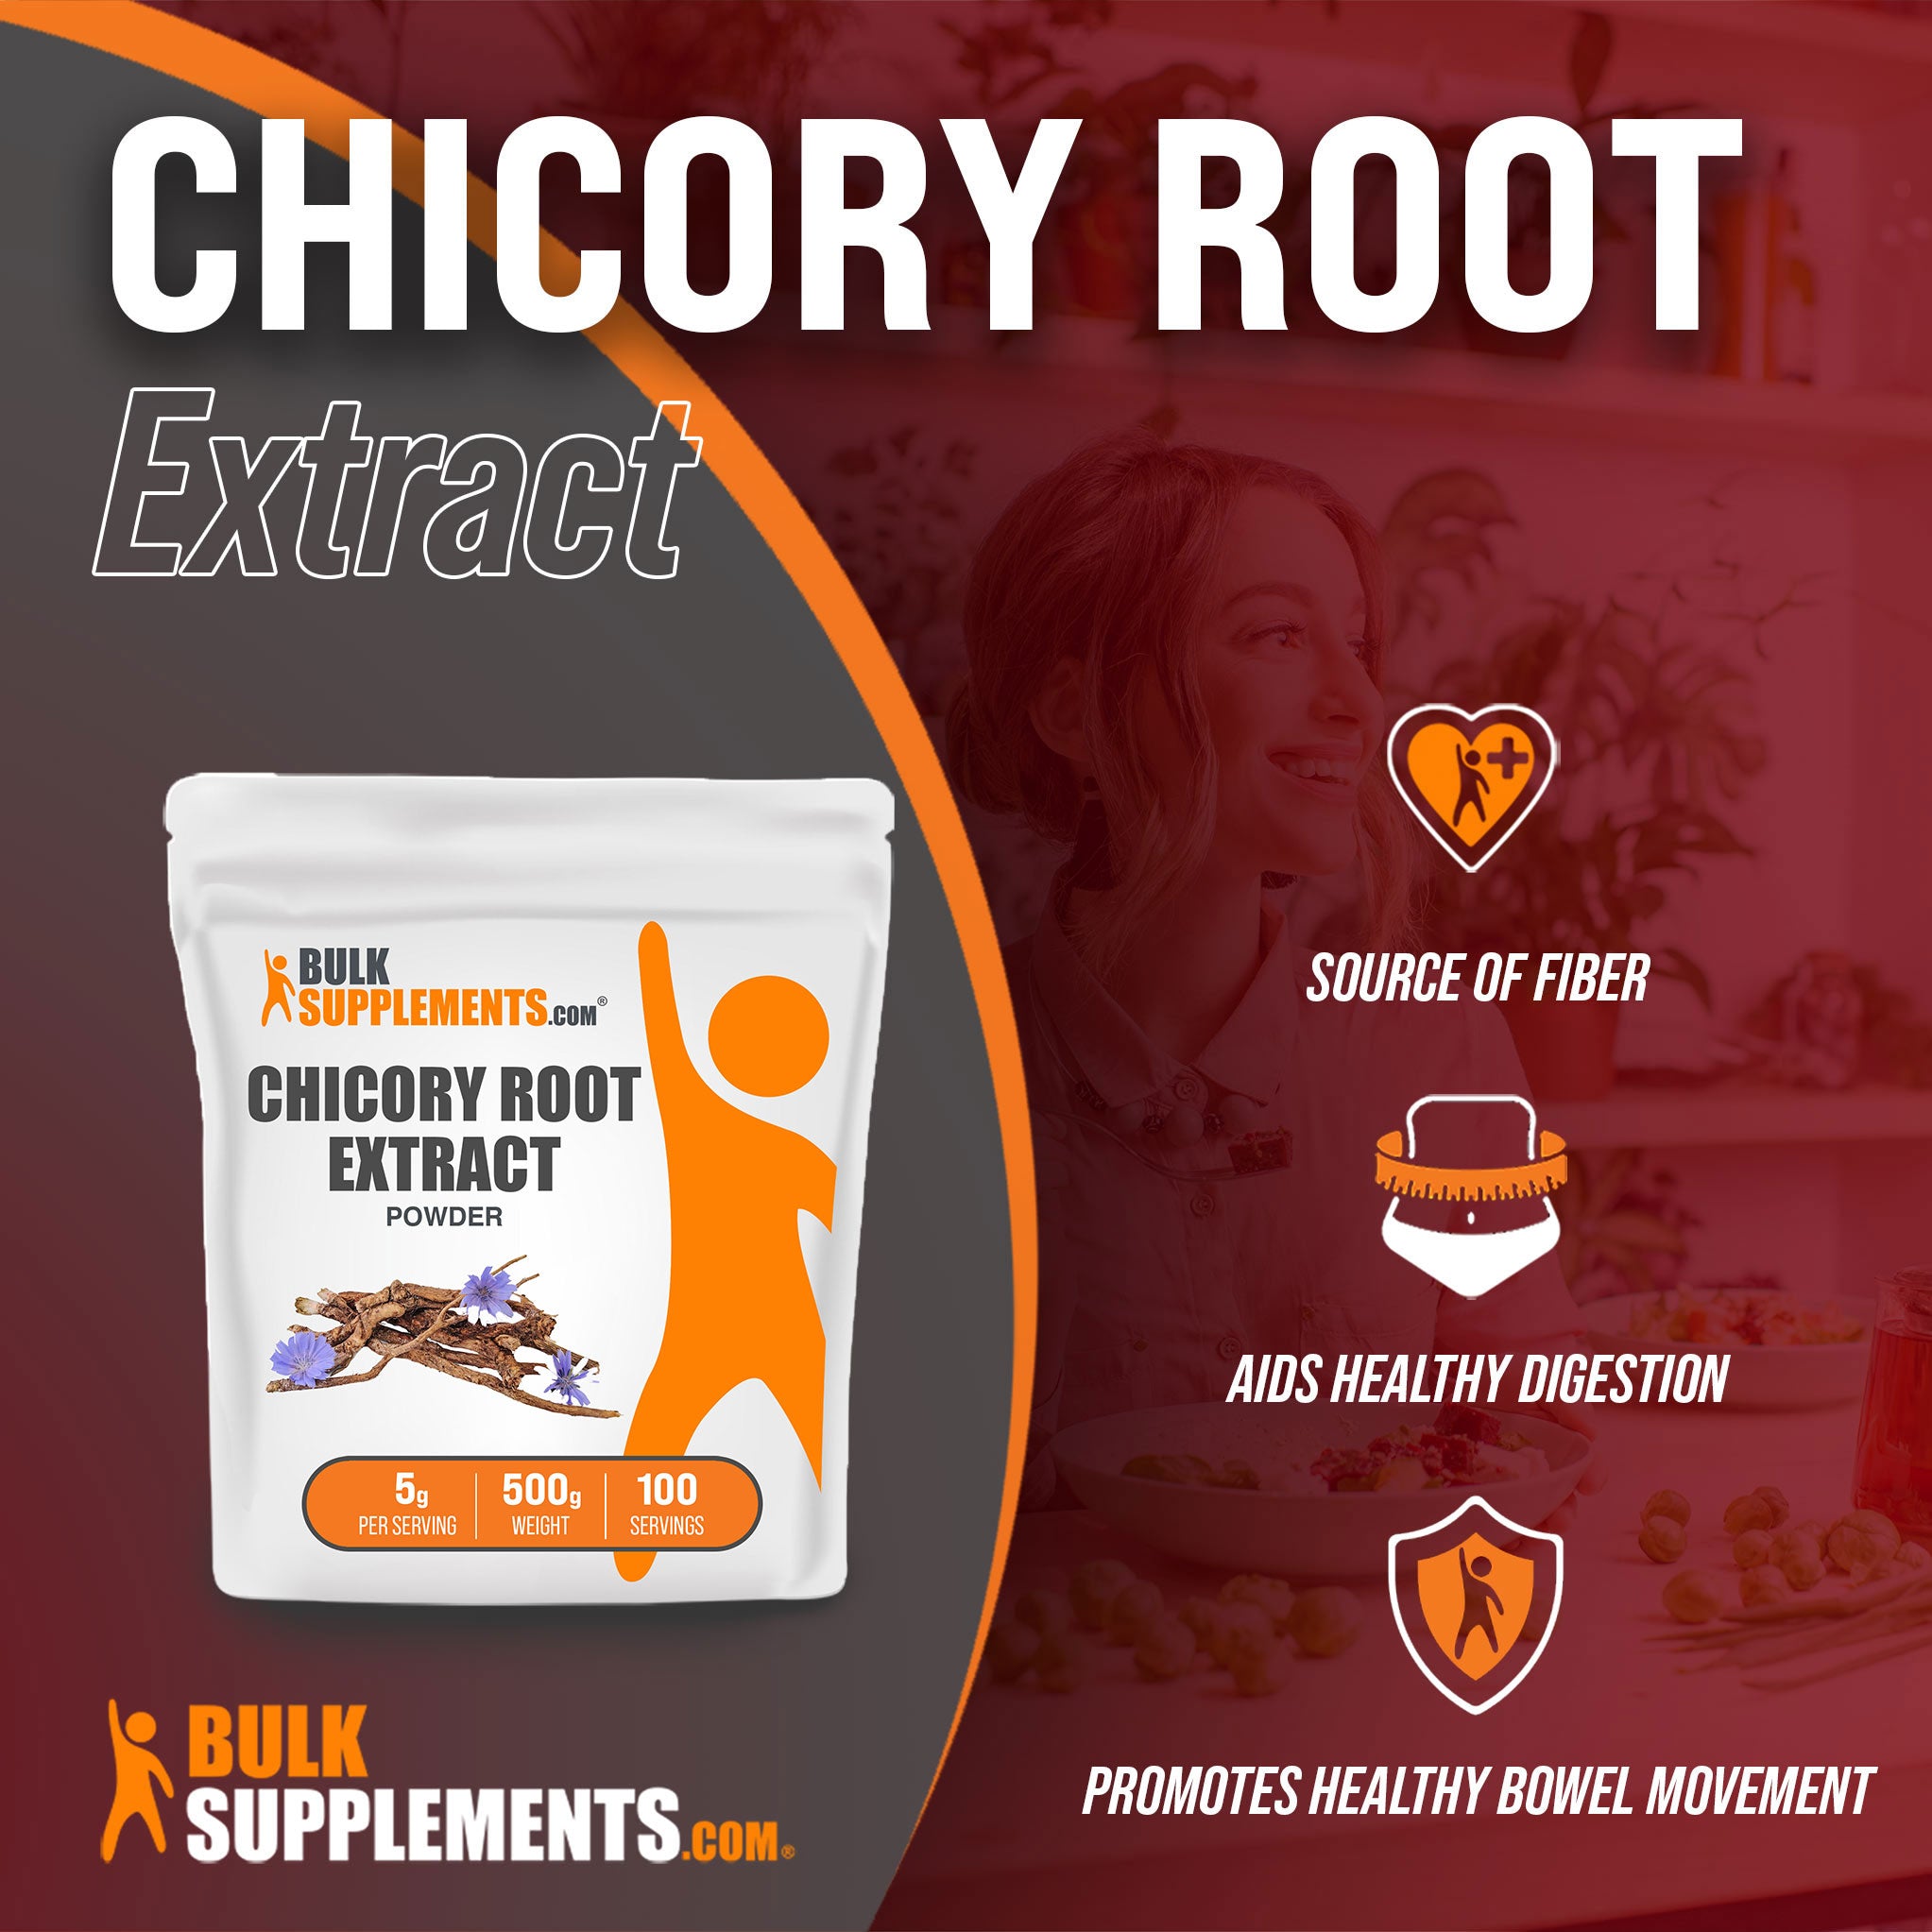 Benefits of 500g Chicory Root Extract Powder; fiber supplement, aids healthy digestion, promotes healthy bowel movement